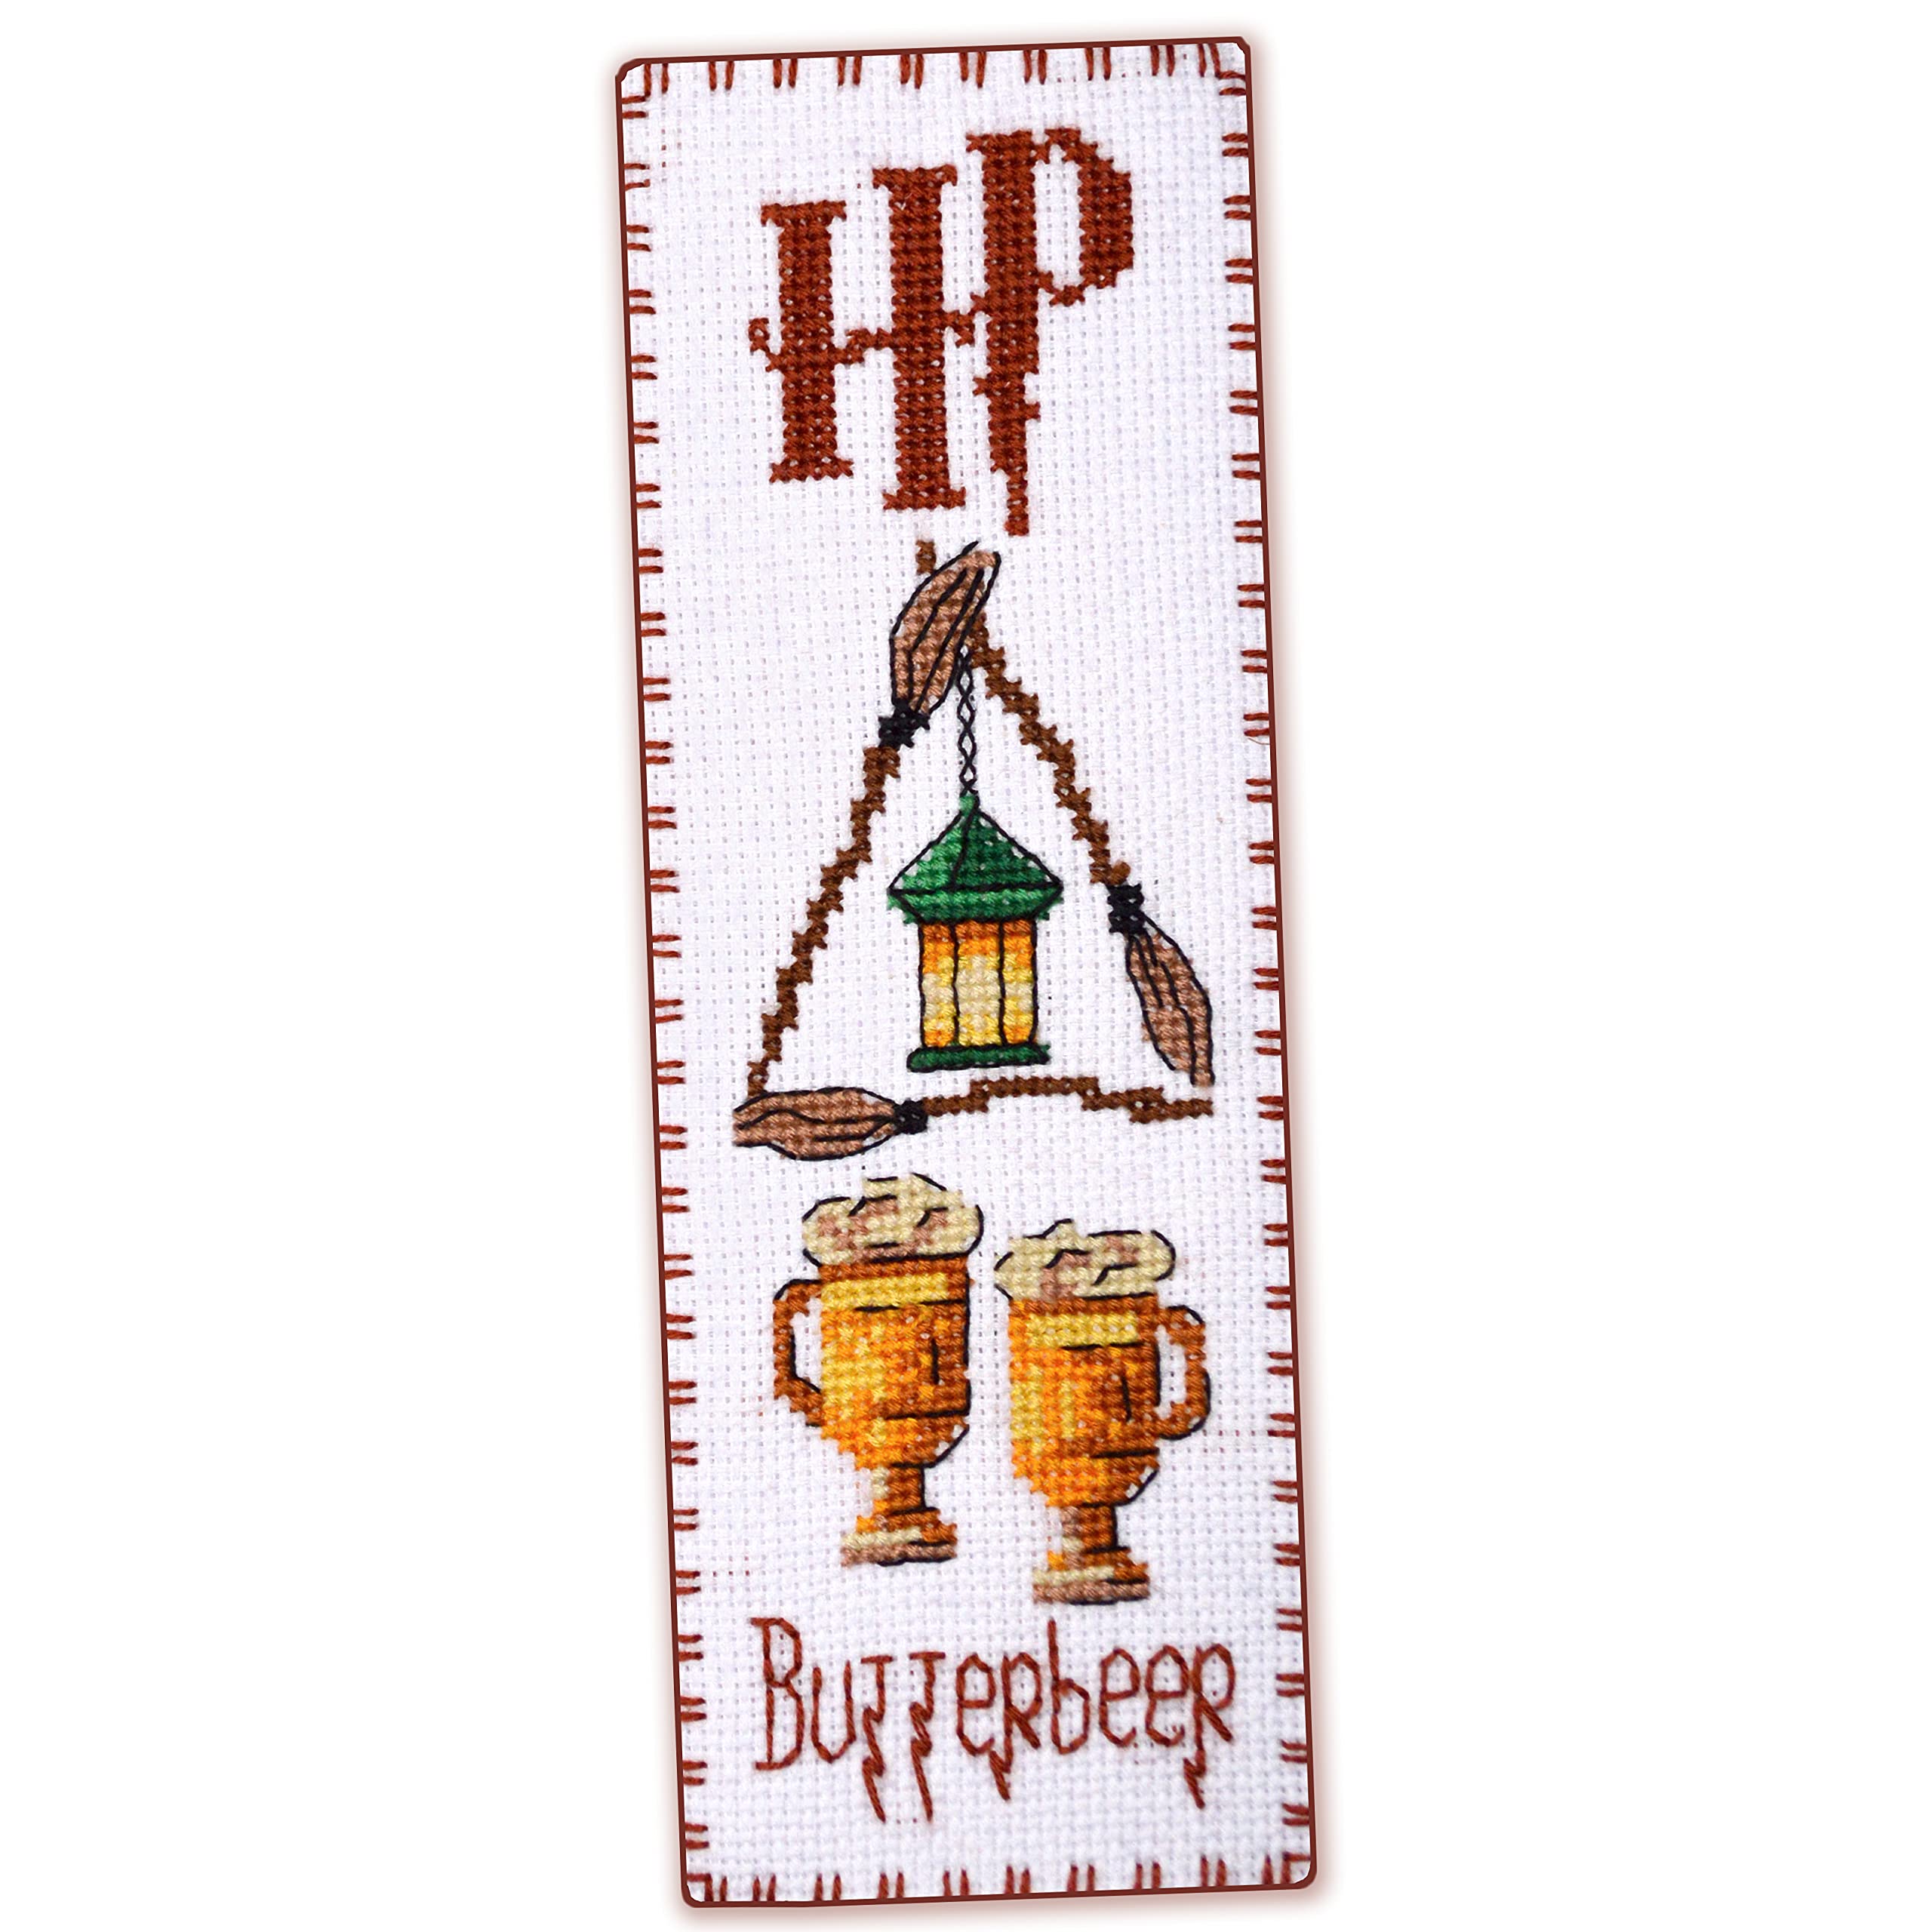 Counted Cross Stitch Bookmark kit 'The Three Broomsticks'- DIY Hand  Embroidery Bookmark Set, 2.36 in 7.70 in (6 19.5 cm), KSK